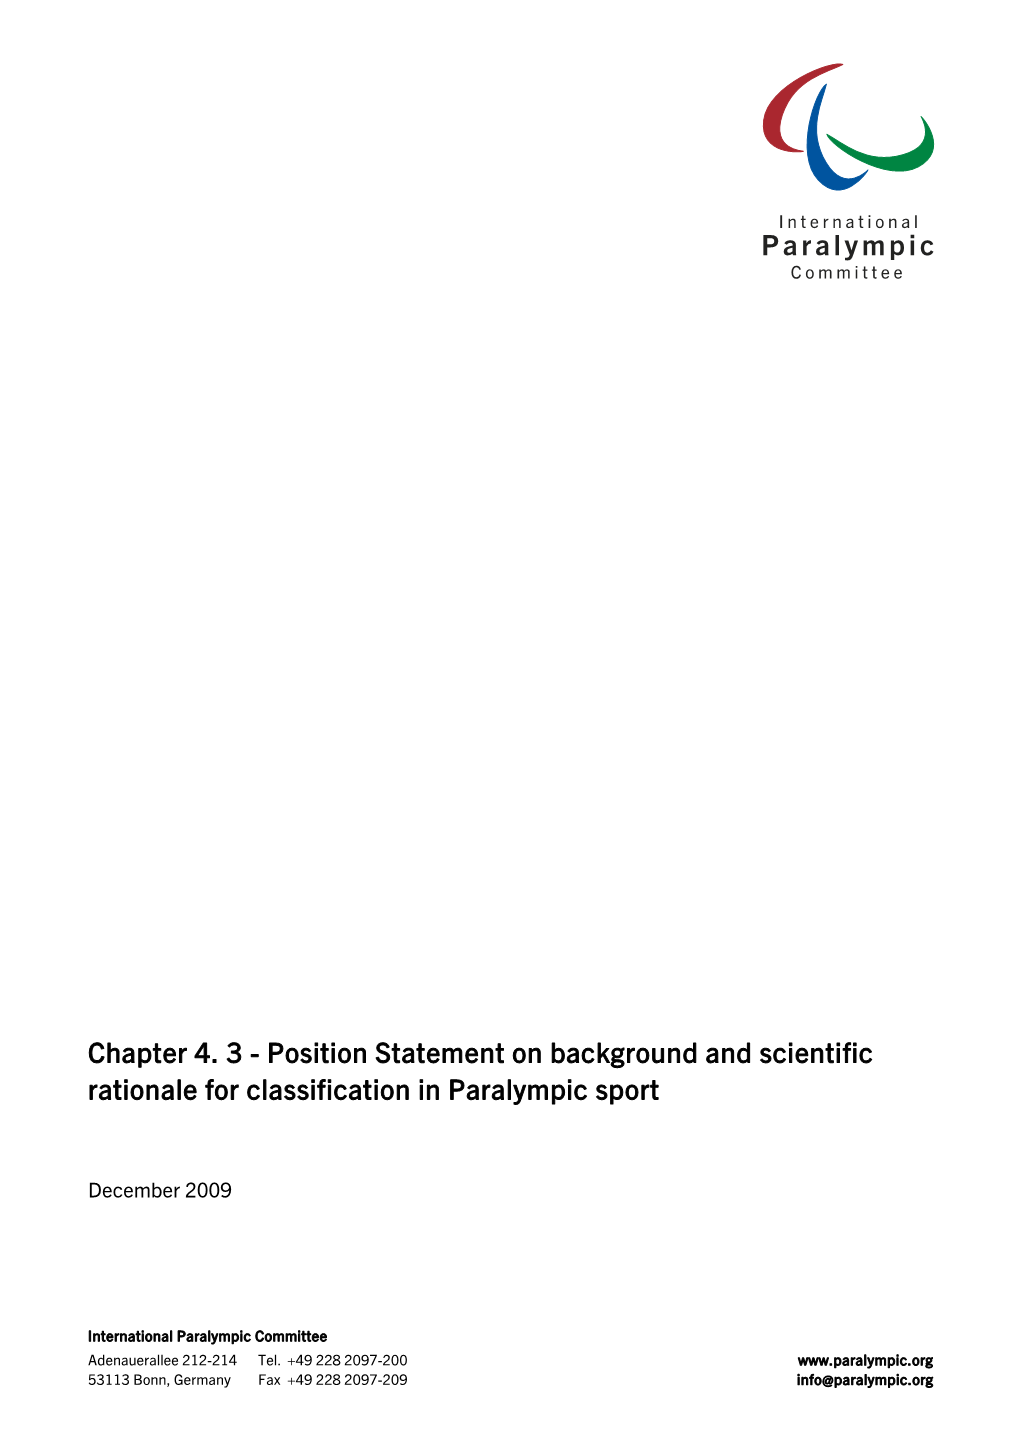 Position Statement on Background and Scientific Rationale for Classification in Paralympic Sport